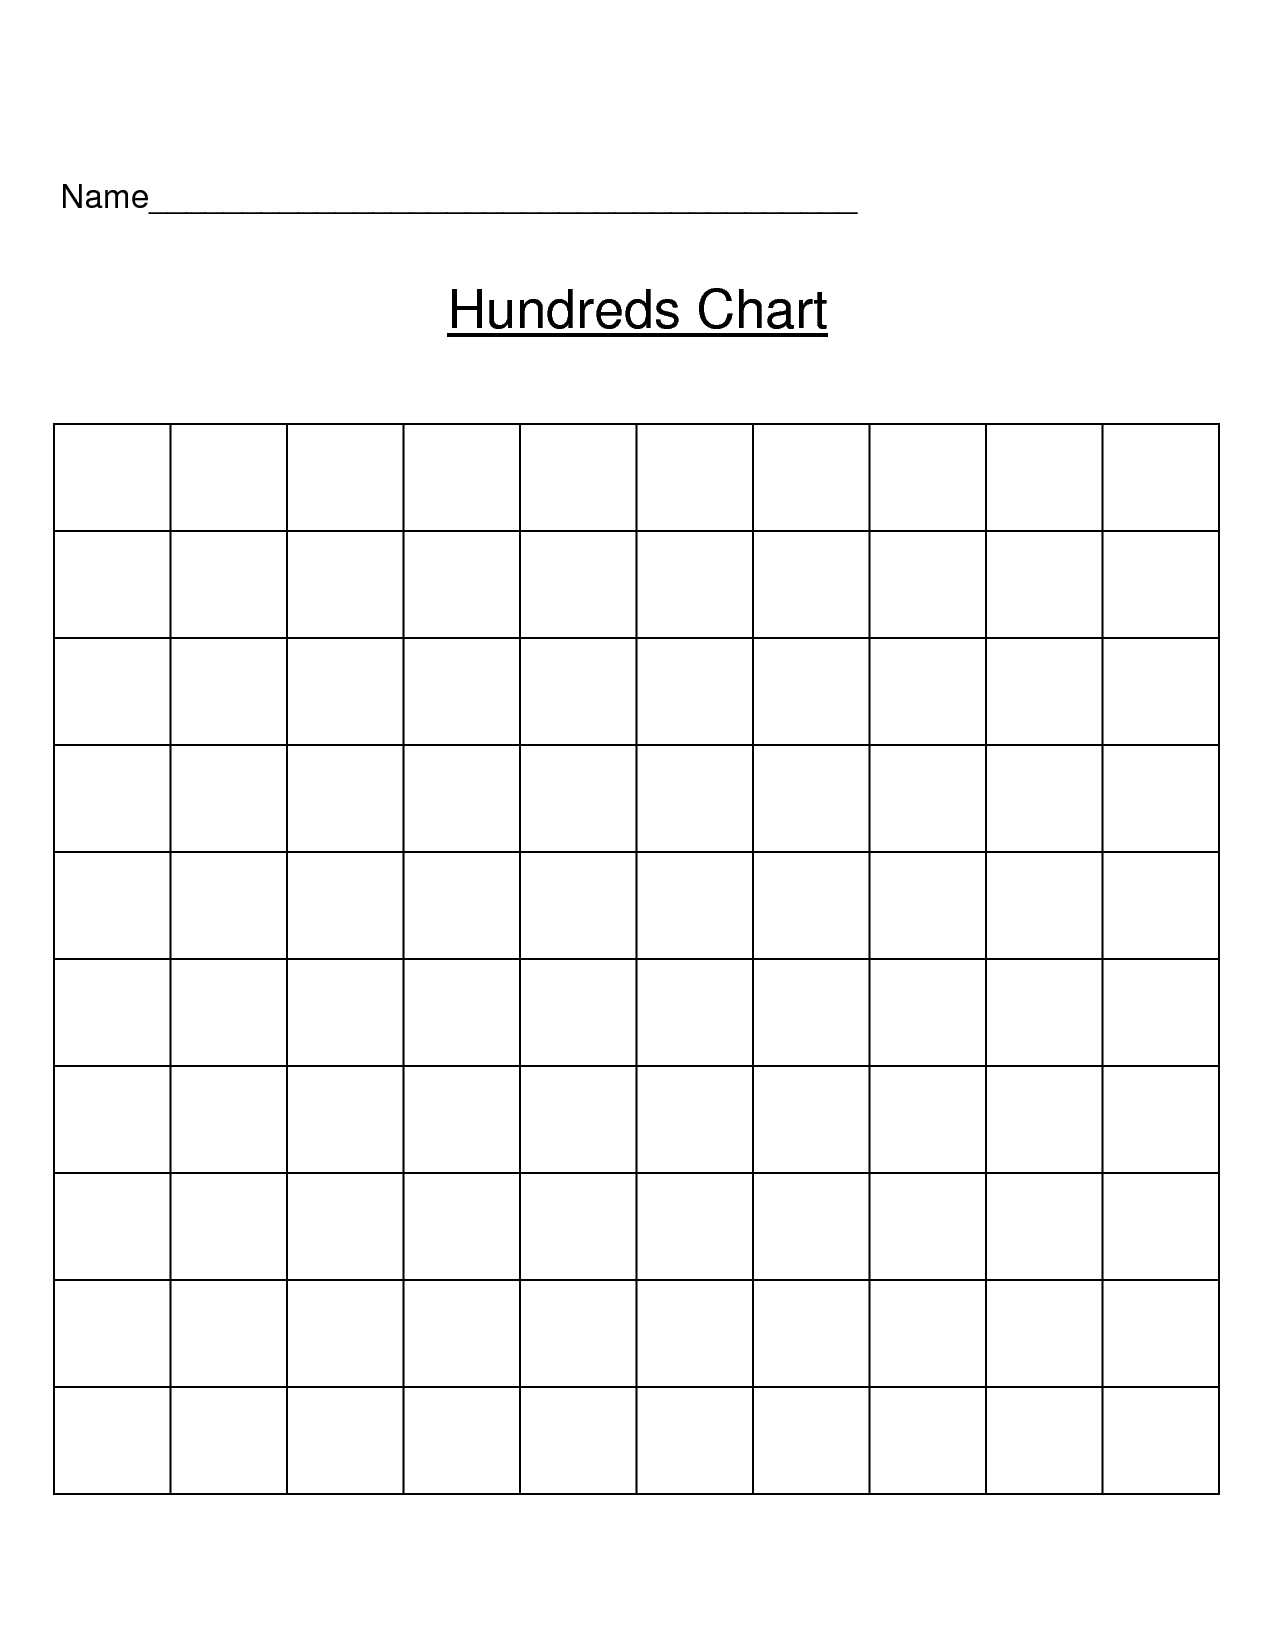 One Hundred Chart Partially Filled (A) Free Printable Blank 100 Chart